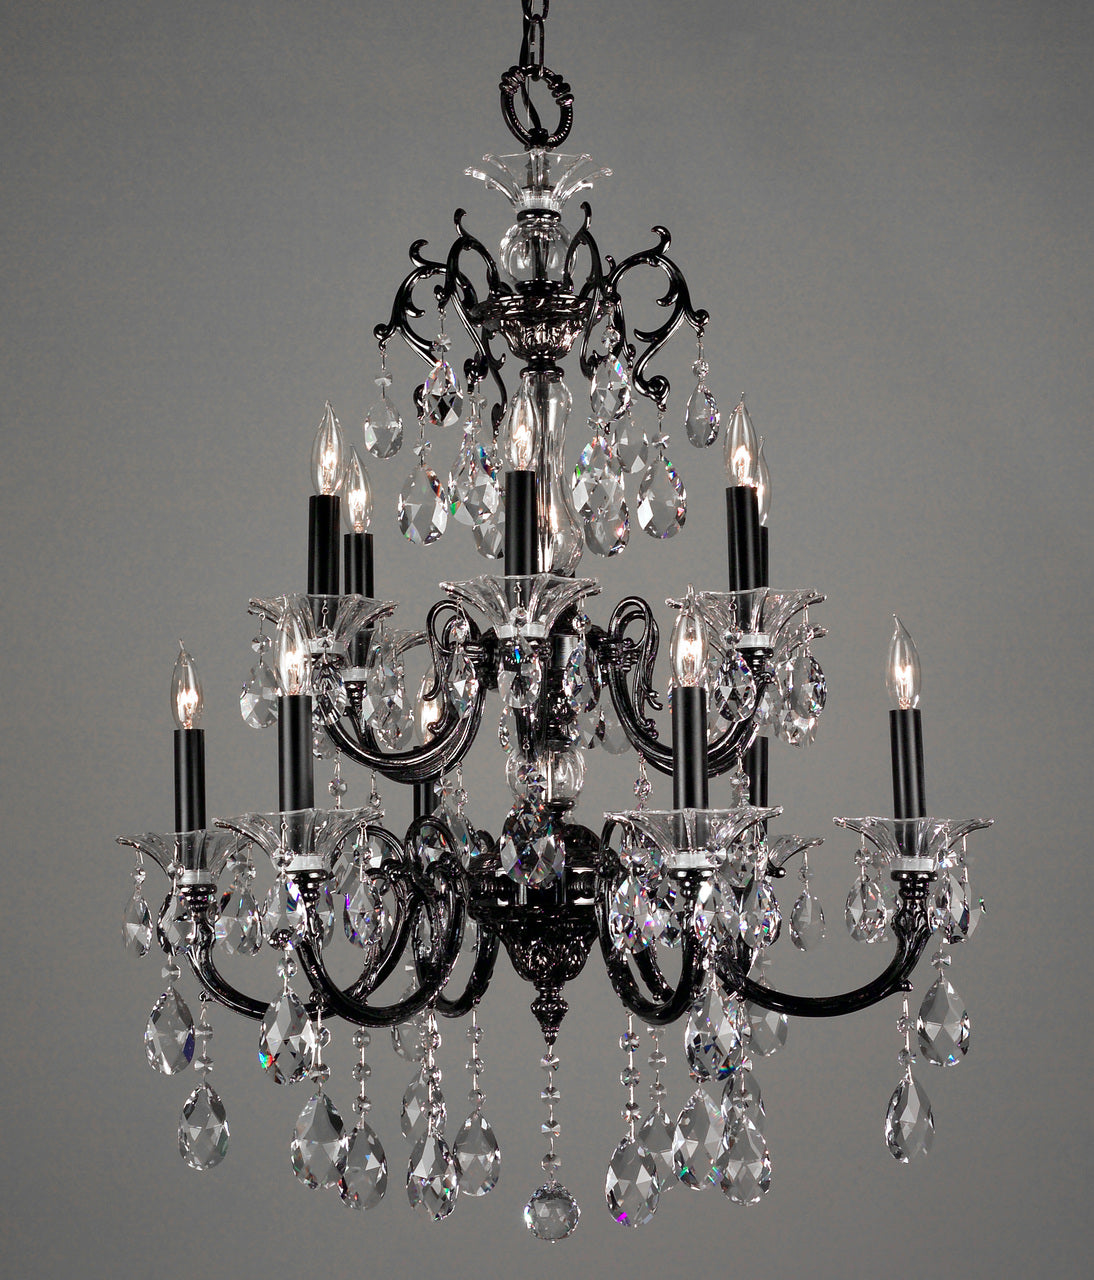 Classic Lighting 57062 MS SJT Via Lombardi Crystal Chandelier in Millennium Silver (Imported from Spain)